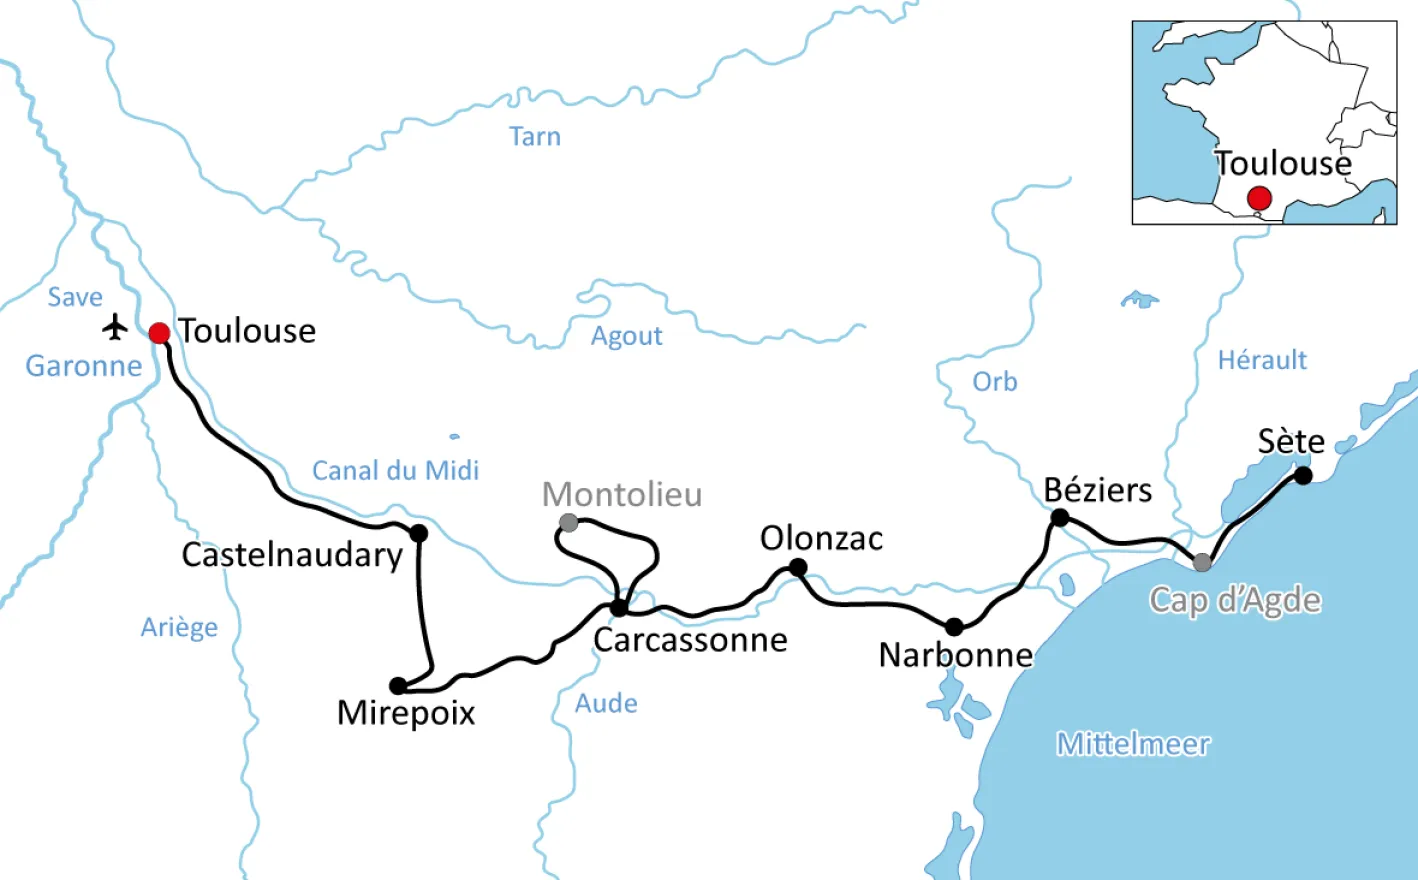 Map for a cycling holiday along the Canal du Midi